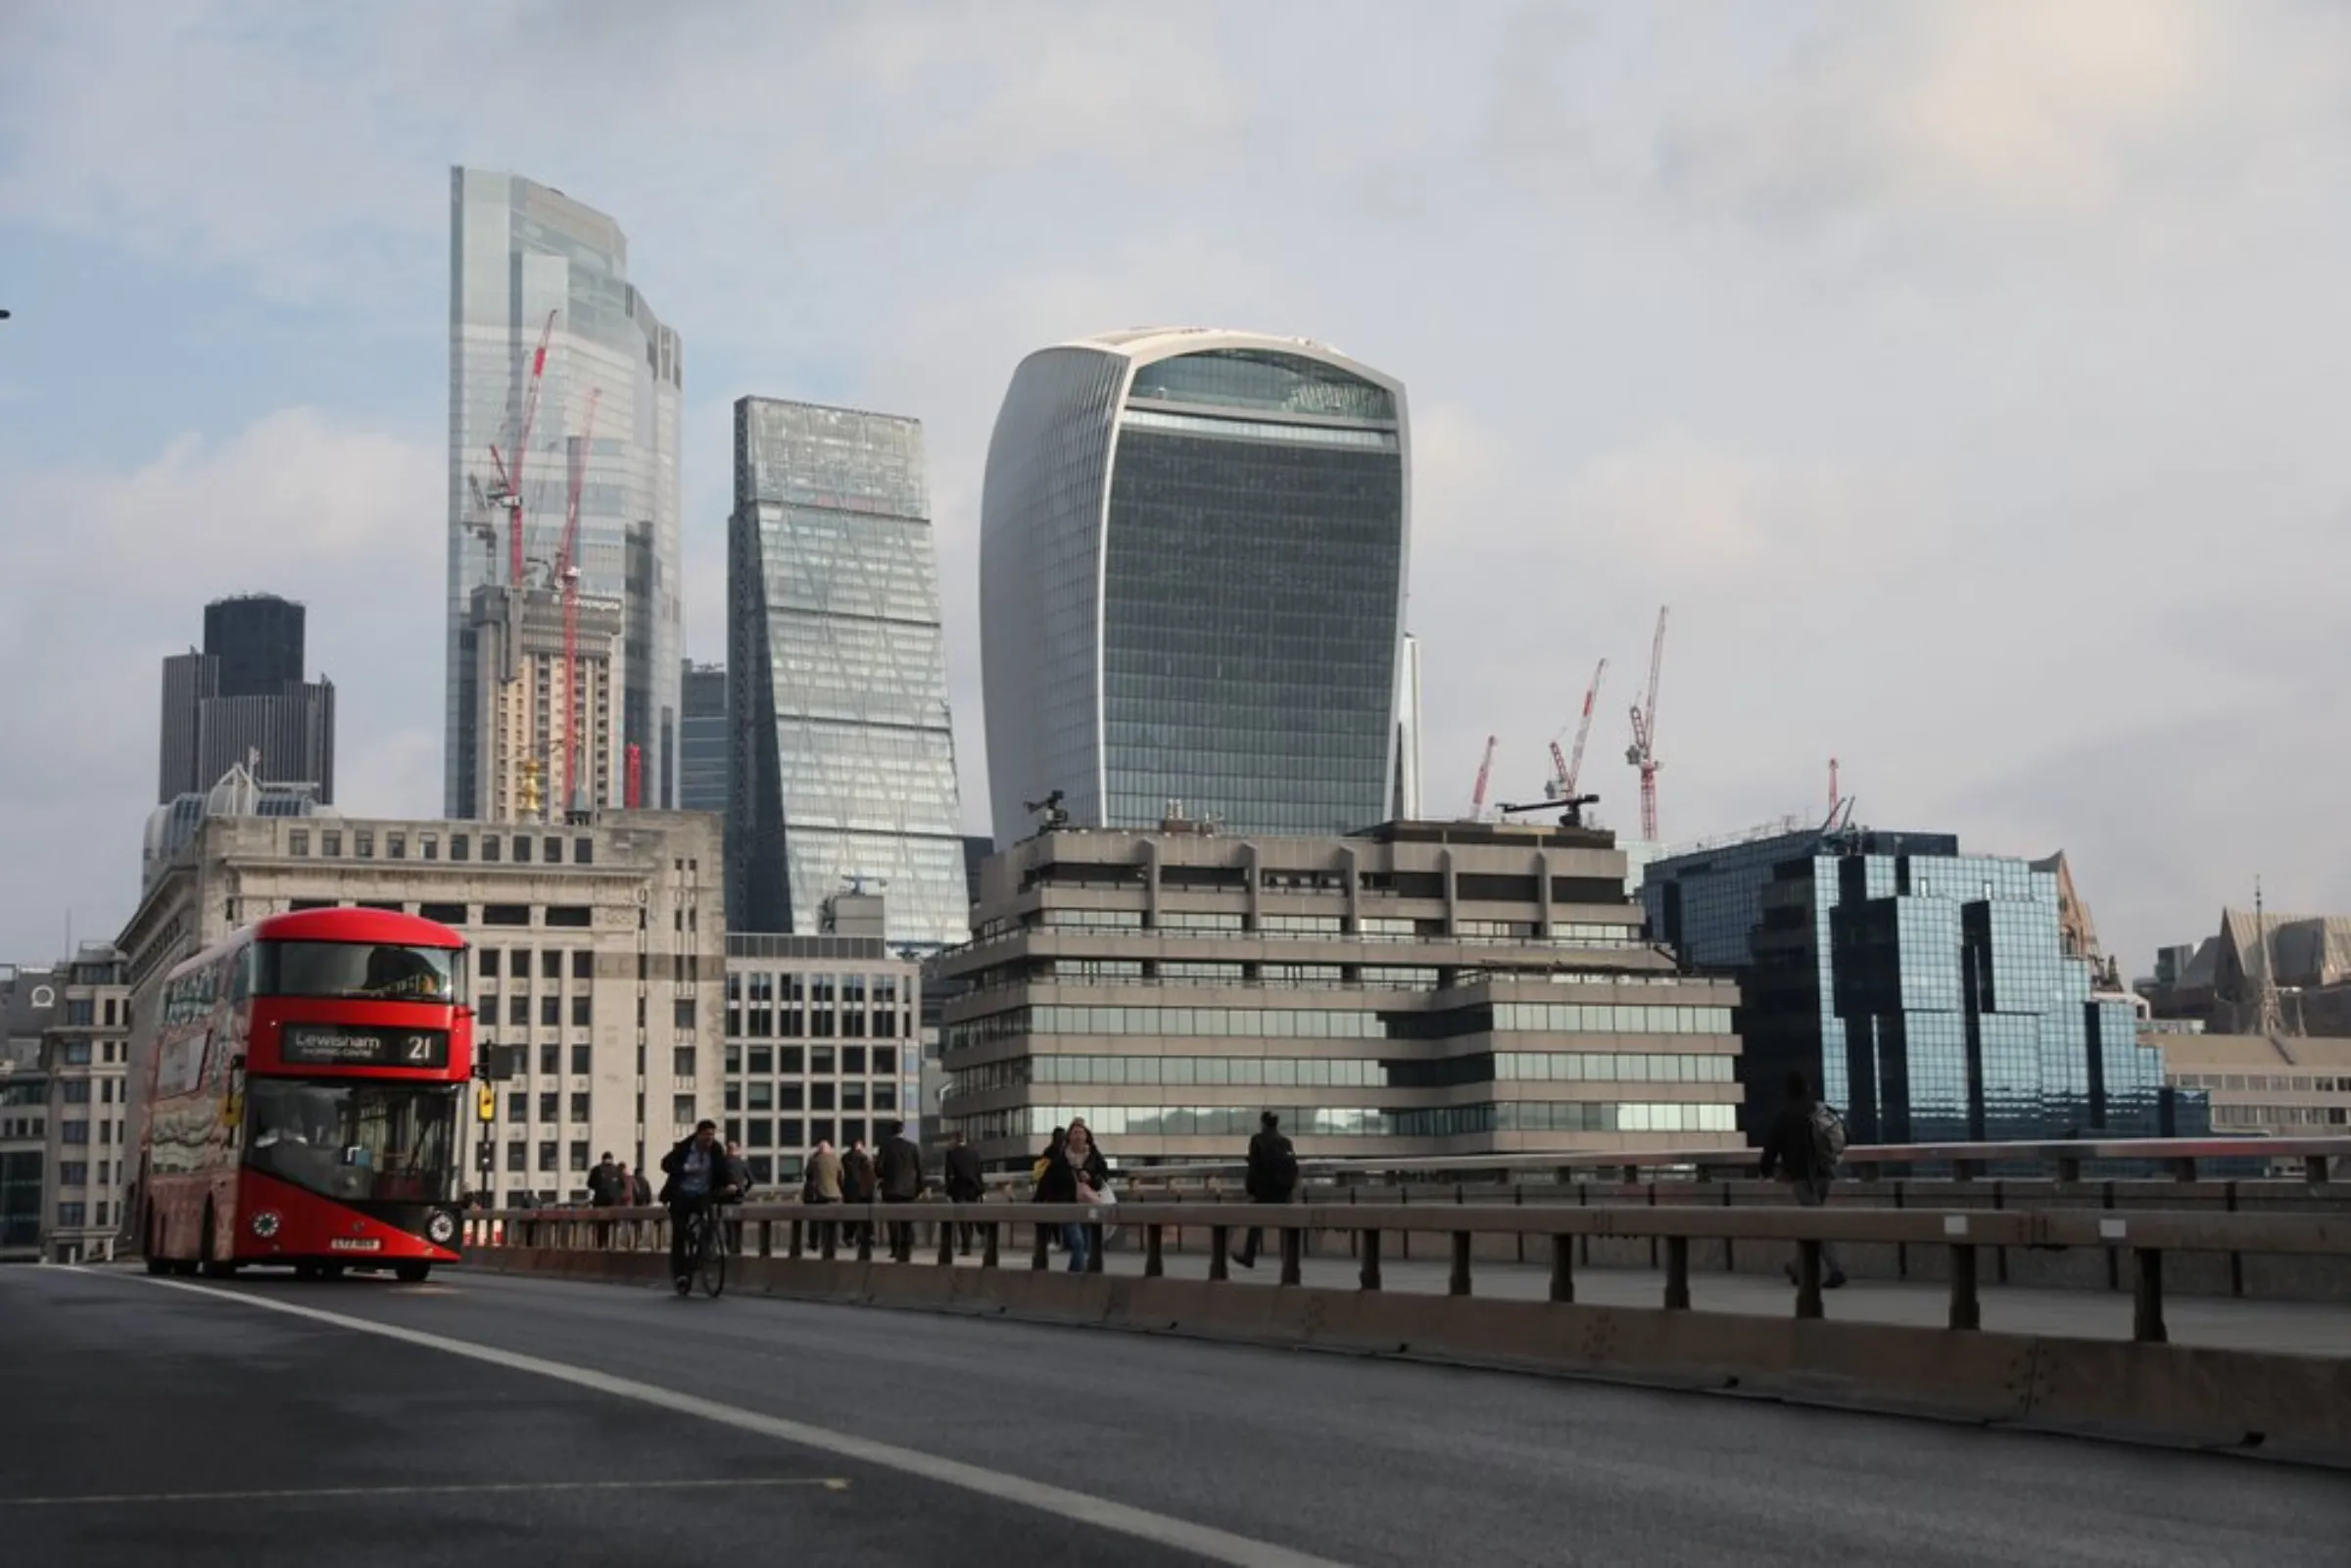 A Routemaster double-decker bus travels across London Bridge in view of London’s financial district on October 19, 2021